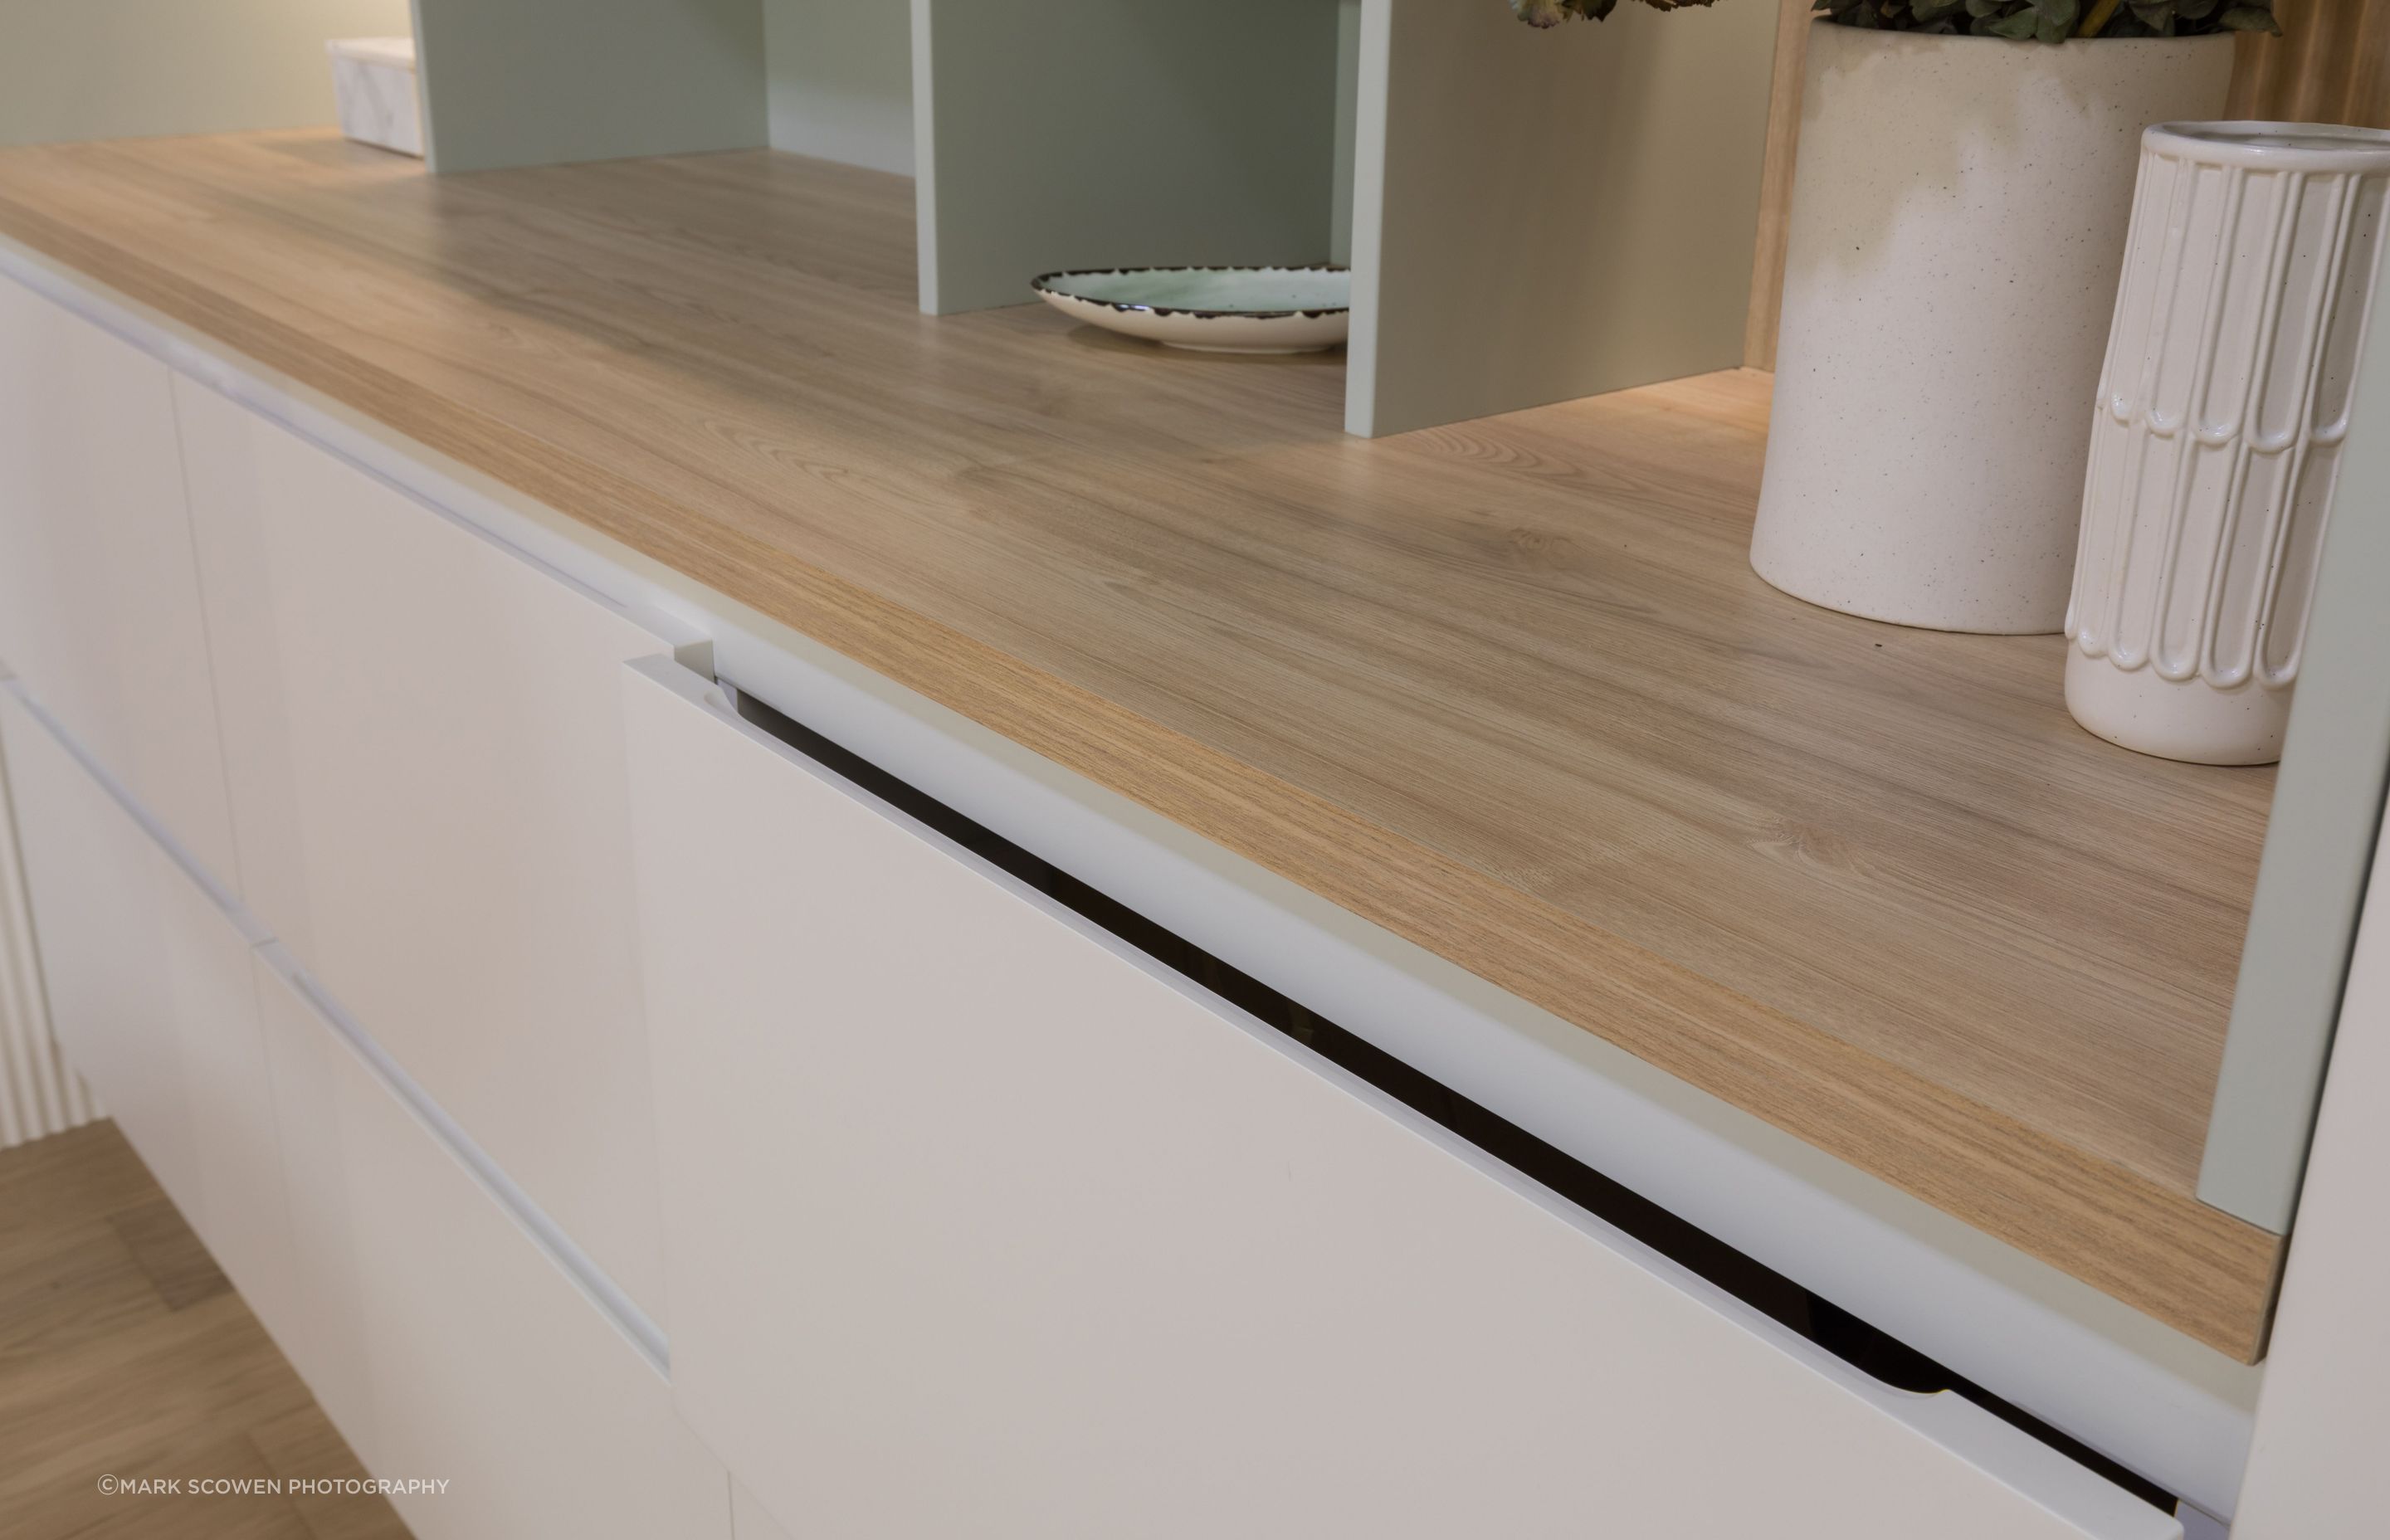 Milan Square with a scallop handle in Limestone - Texture. Shelving top in Ranfurly Oak by Bestwood Melamine. Dezignatek Showroom, Home Ideas Centre Auckland